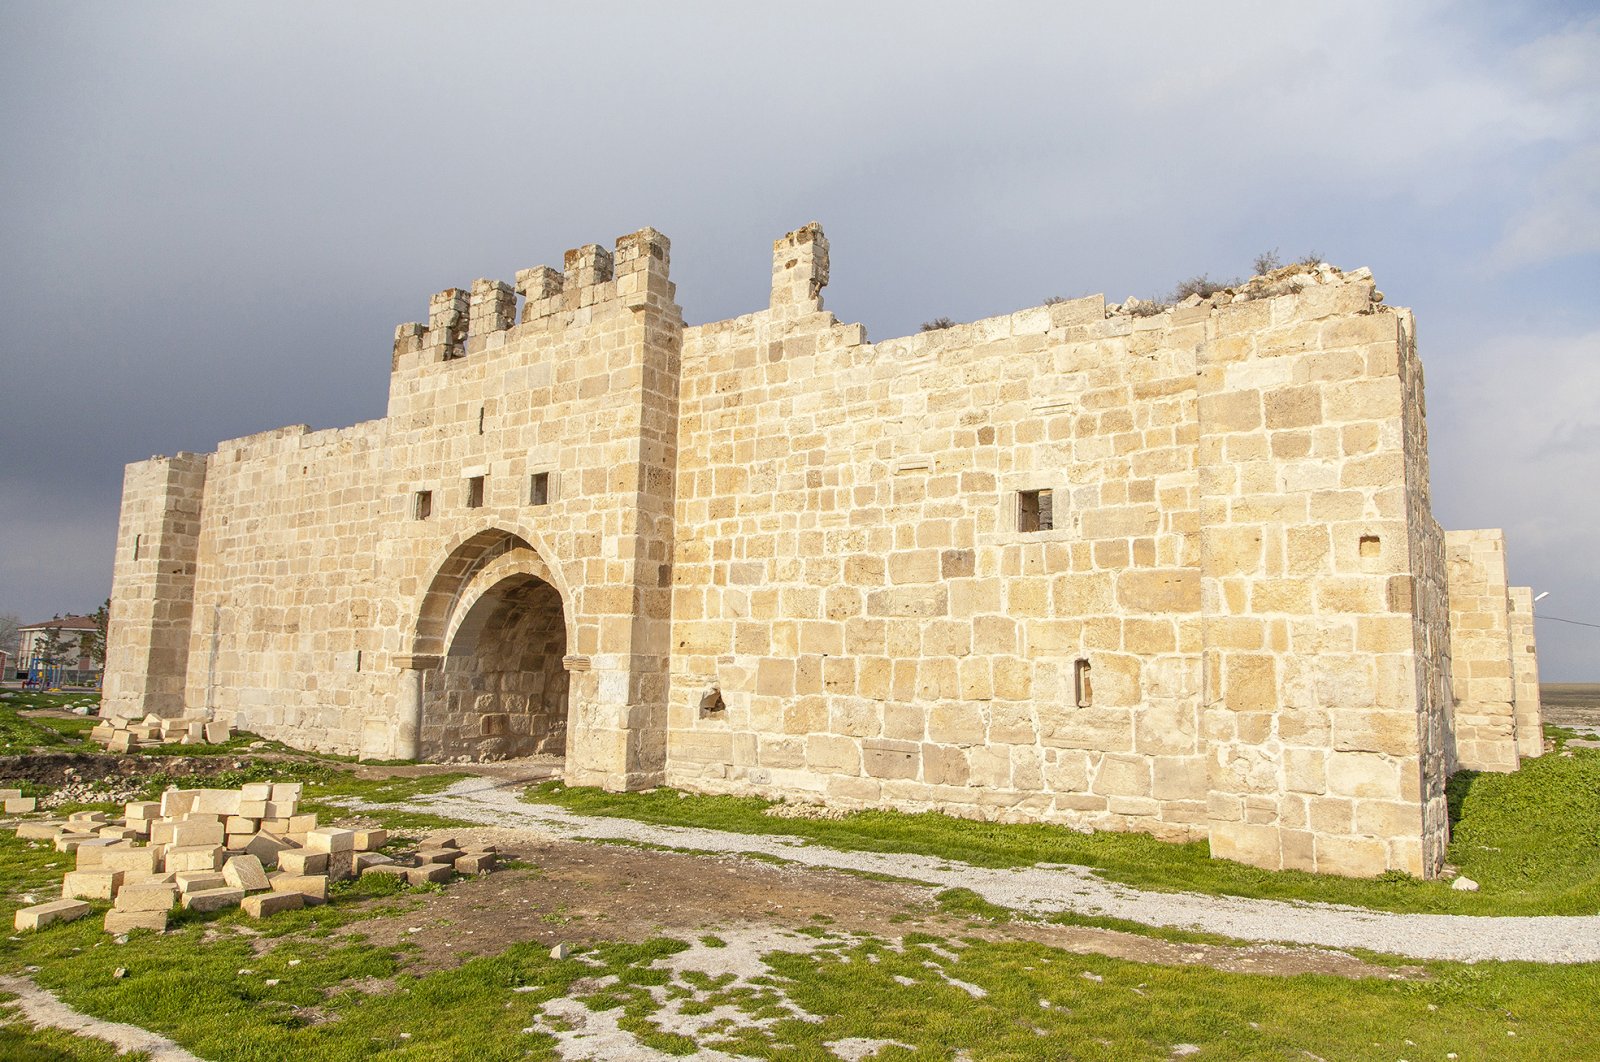 The Obruk Han will join Turkey’s tourism attractions with the completion of the restoration.